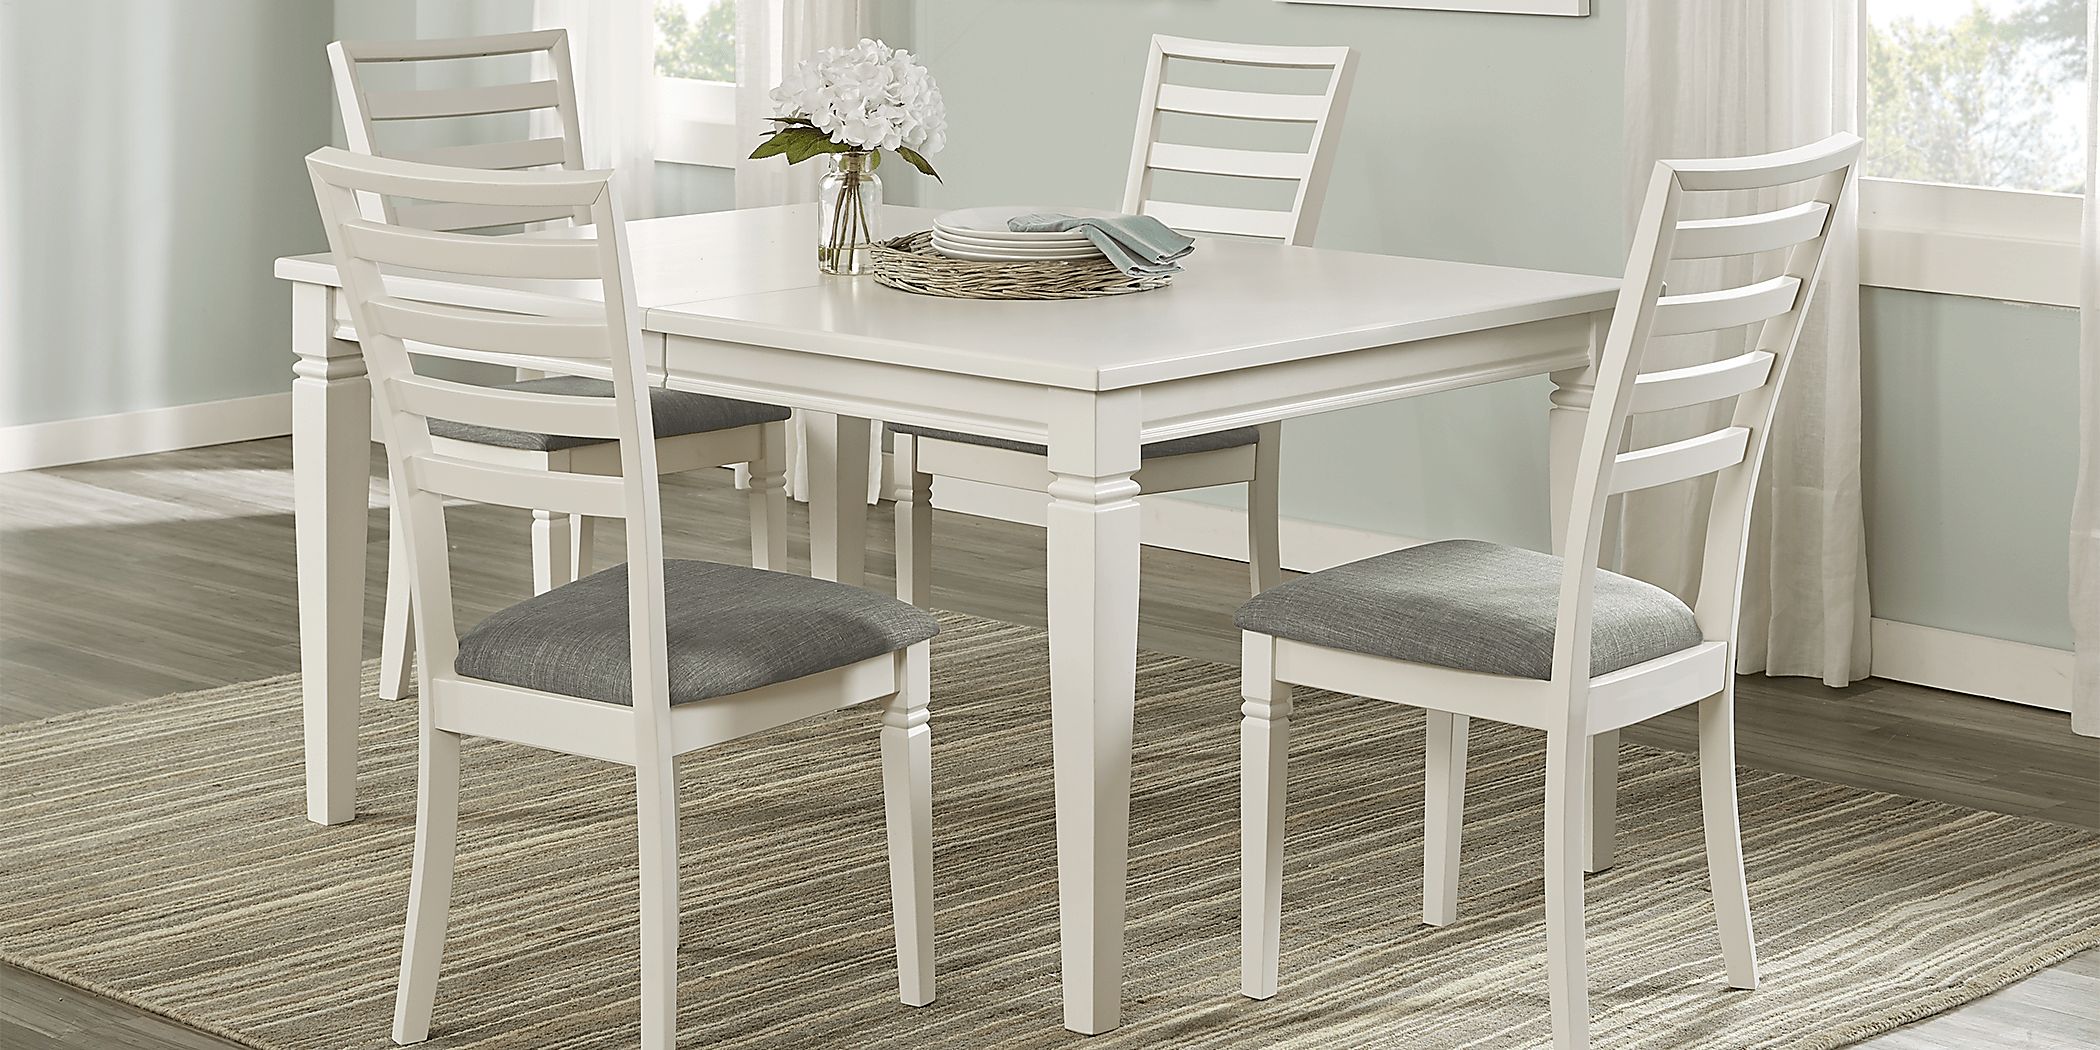 Riverdale White 5 Pc Rectangle Dining Room with Ladder Back Chairs